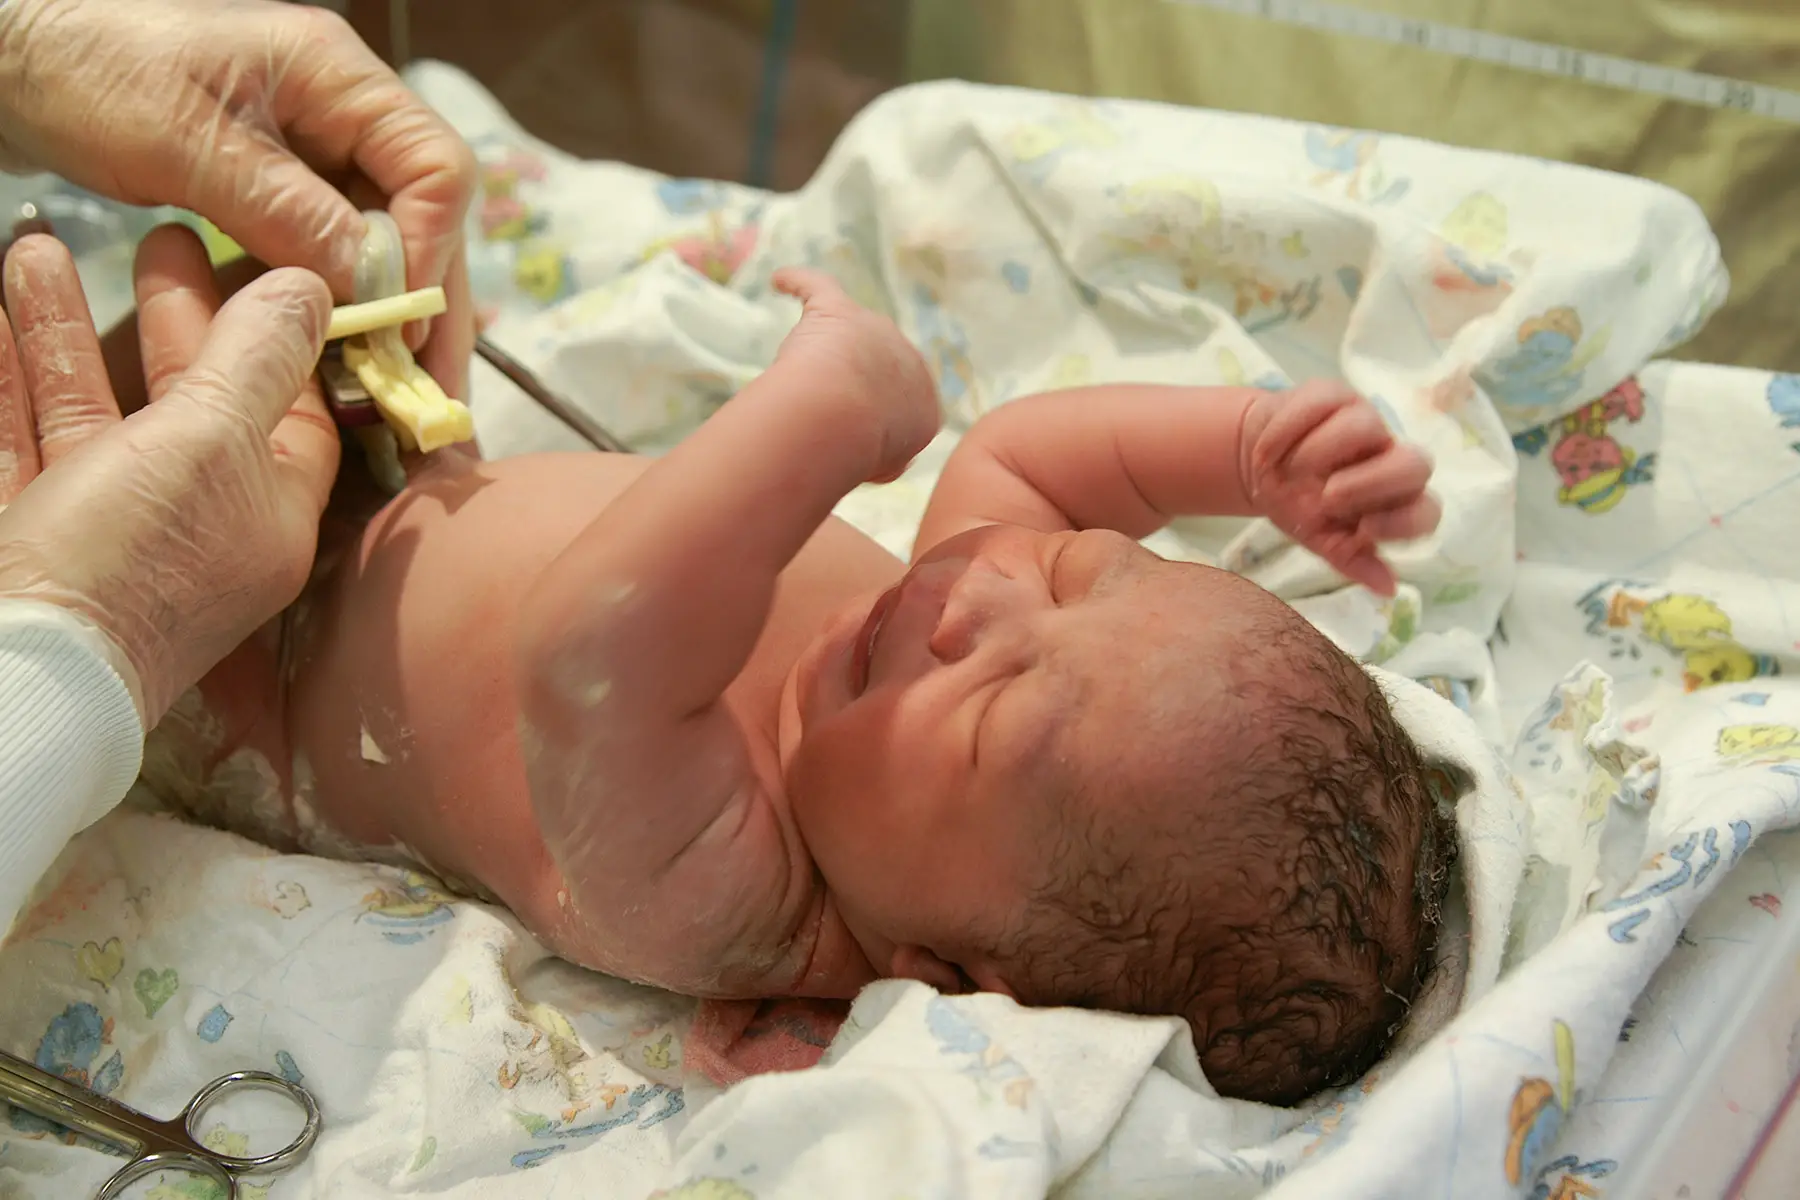 A doctor clamping the umbilical cord of a newborn baby